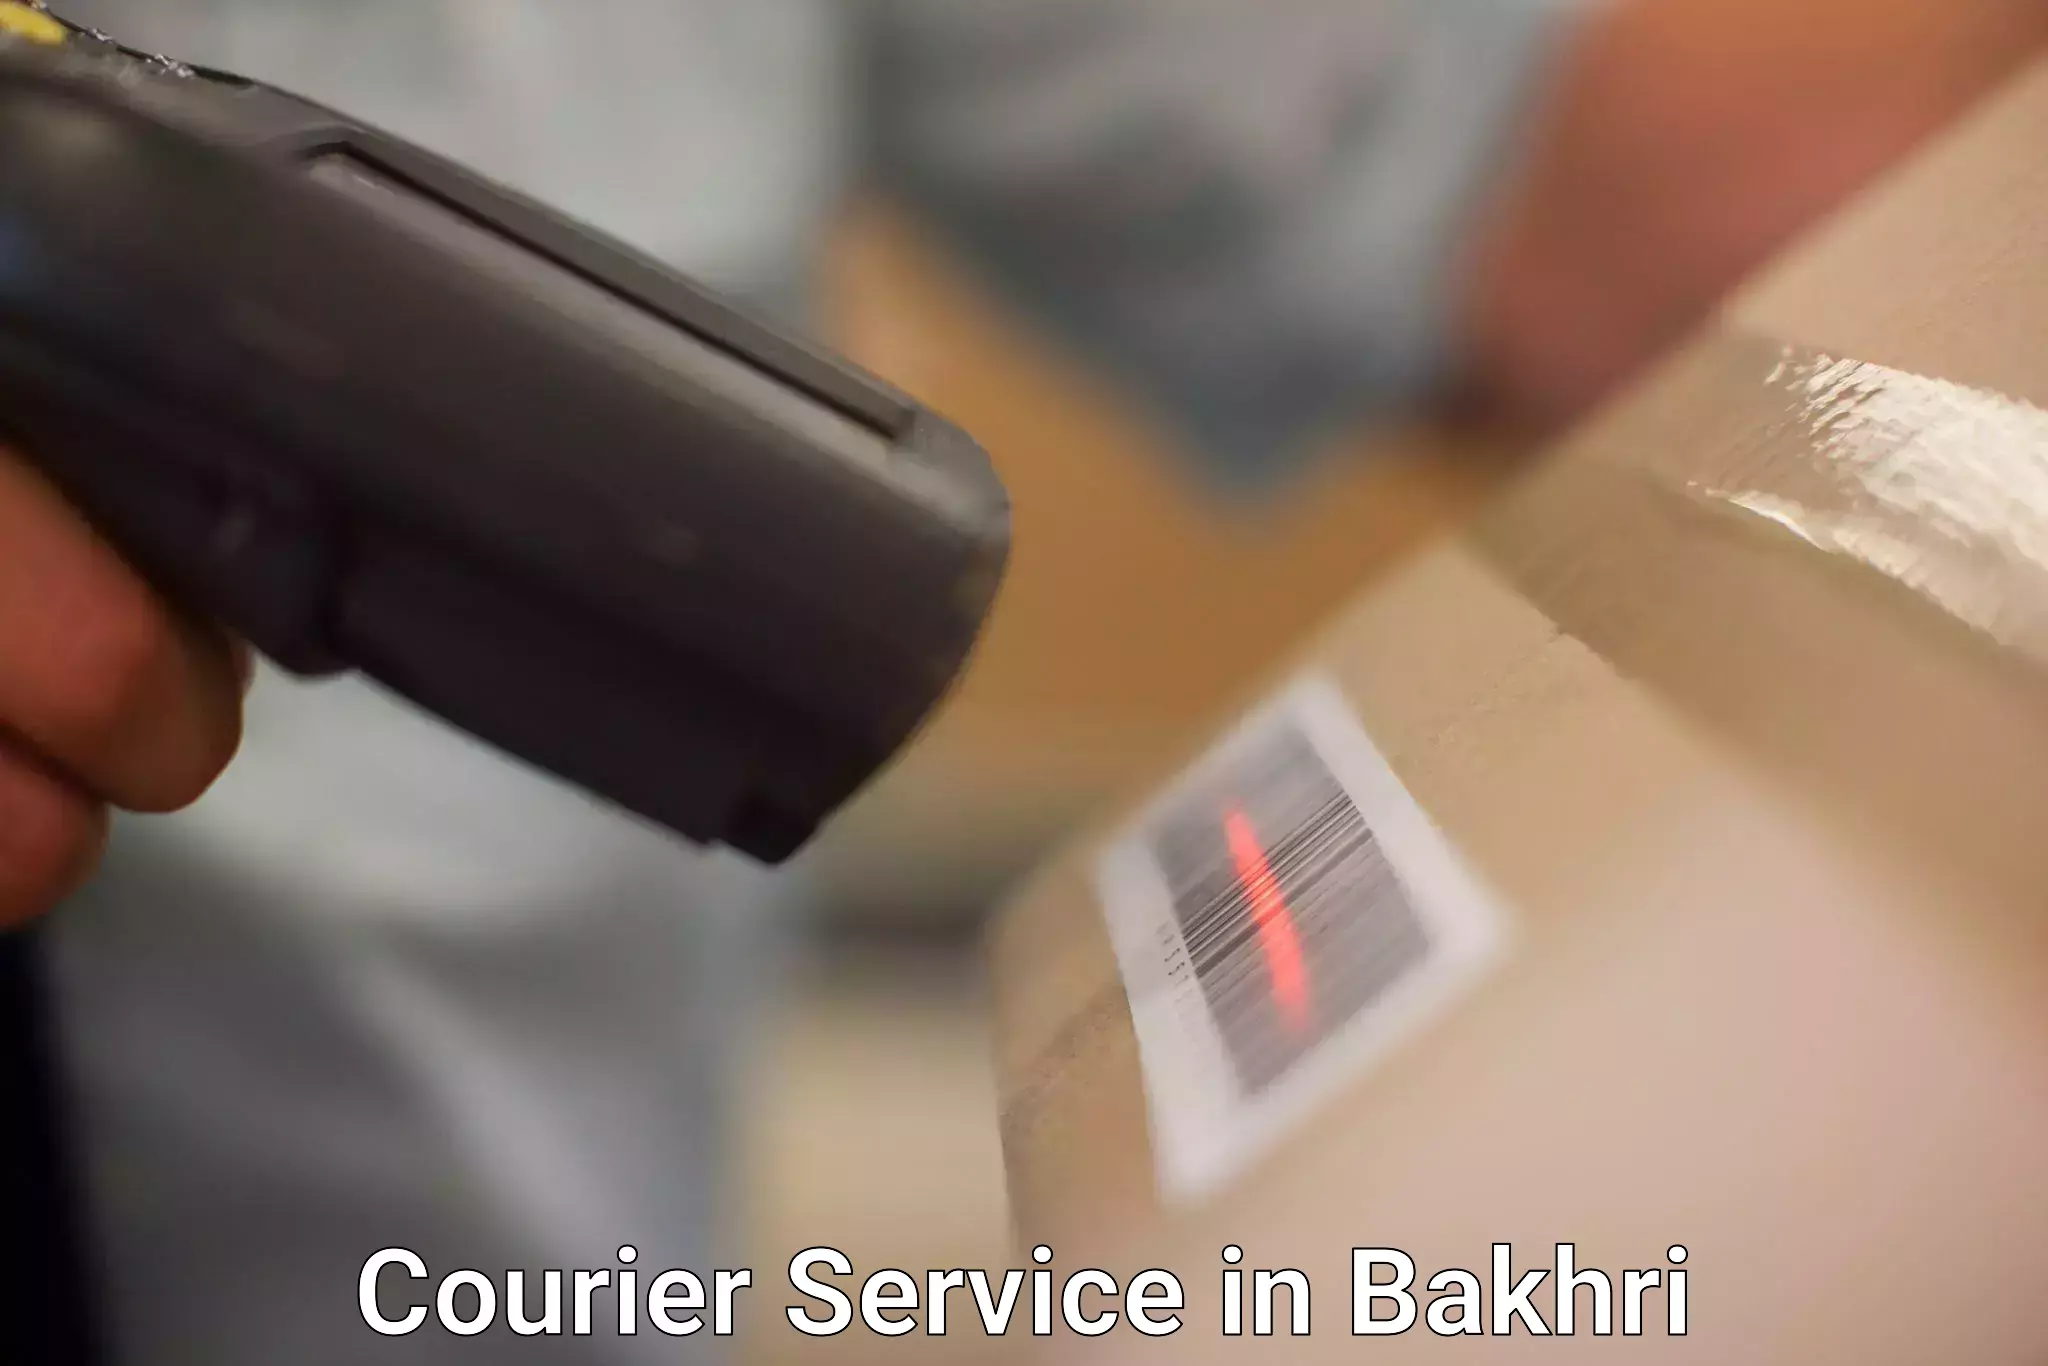 Affordable shipping solutions in Bakhri